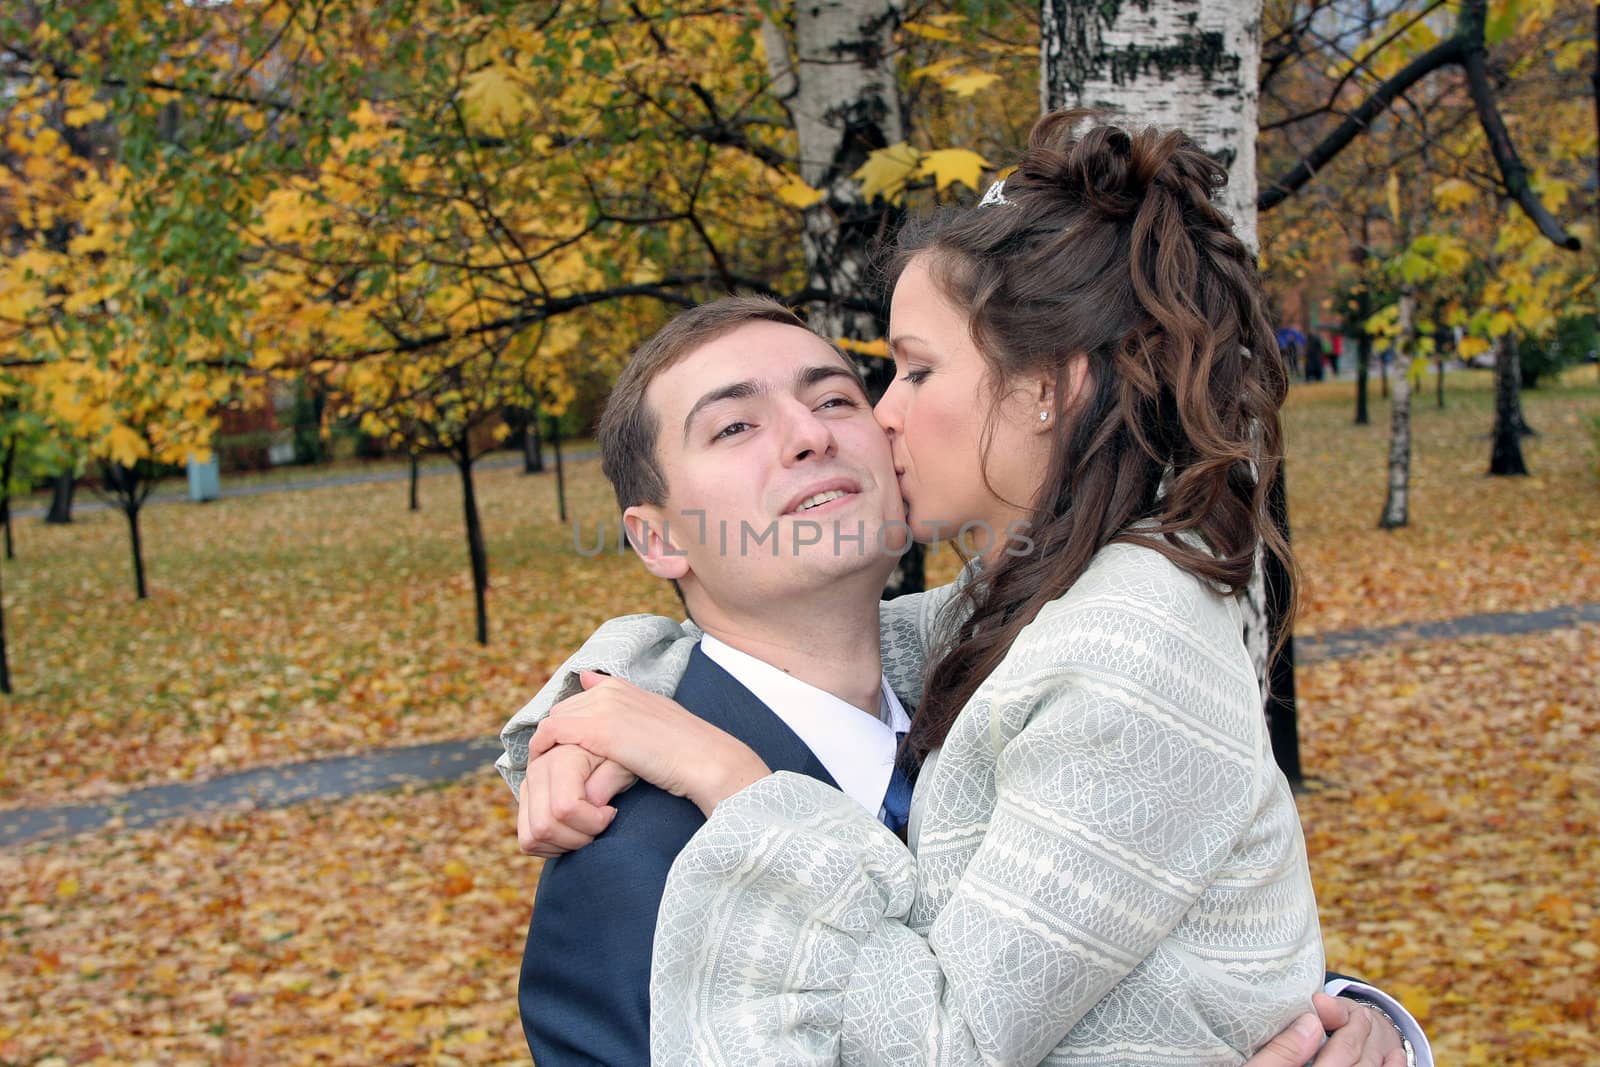 The bride kisses the groom in park in the autumn